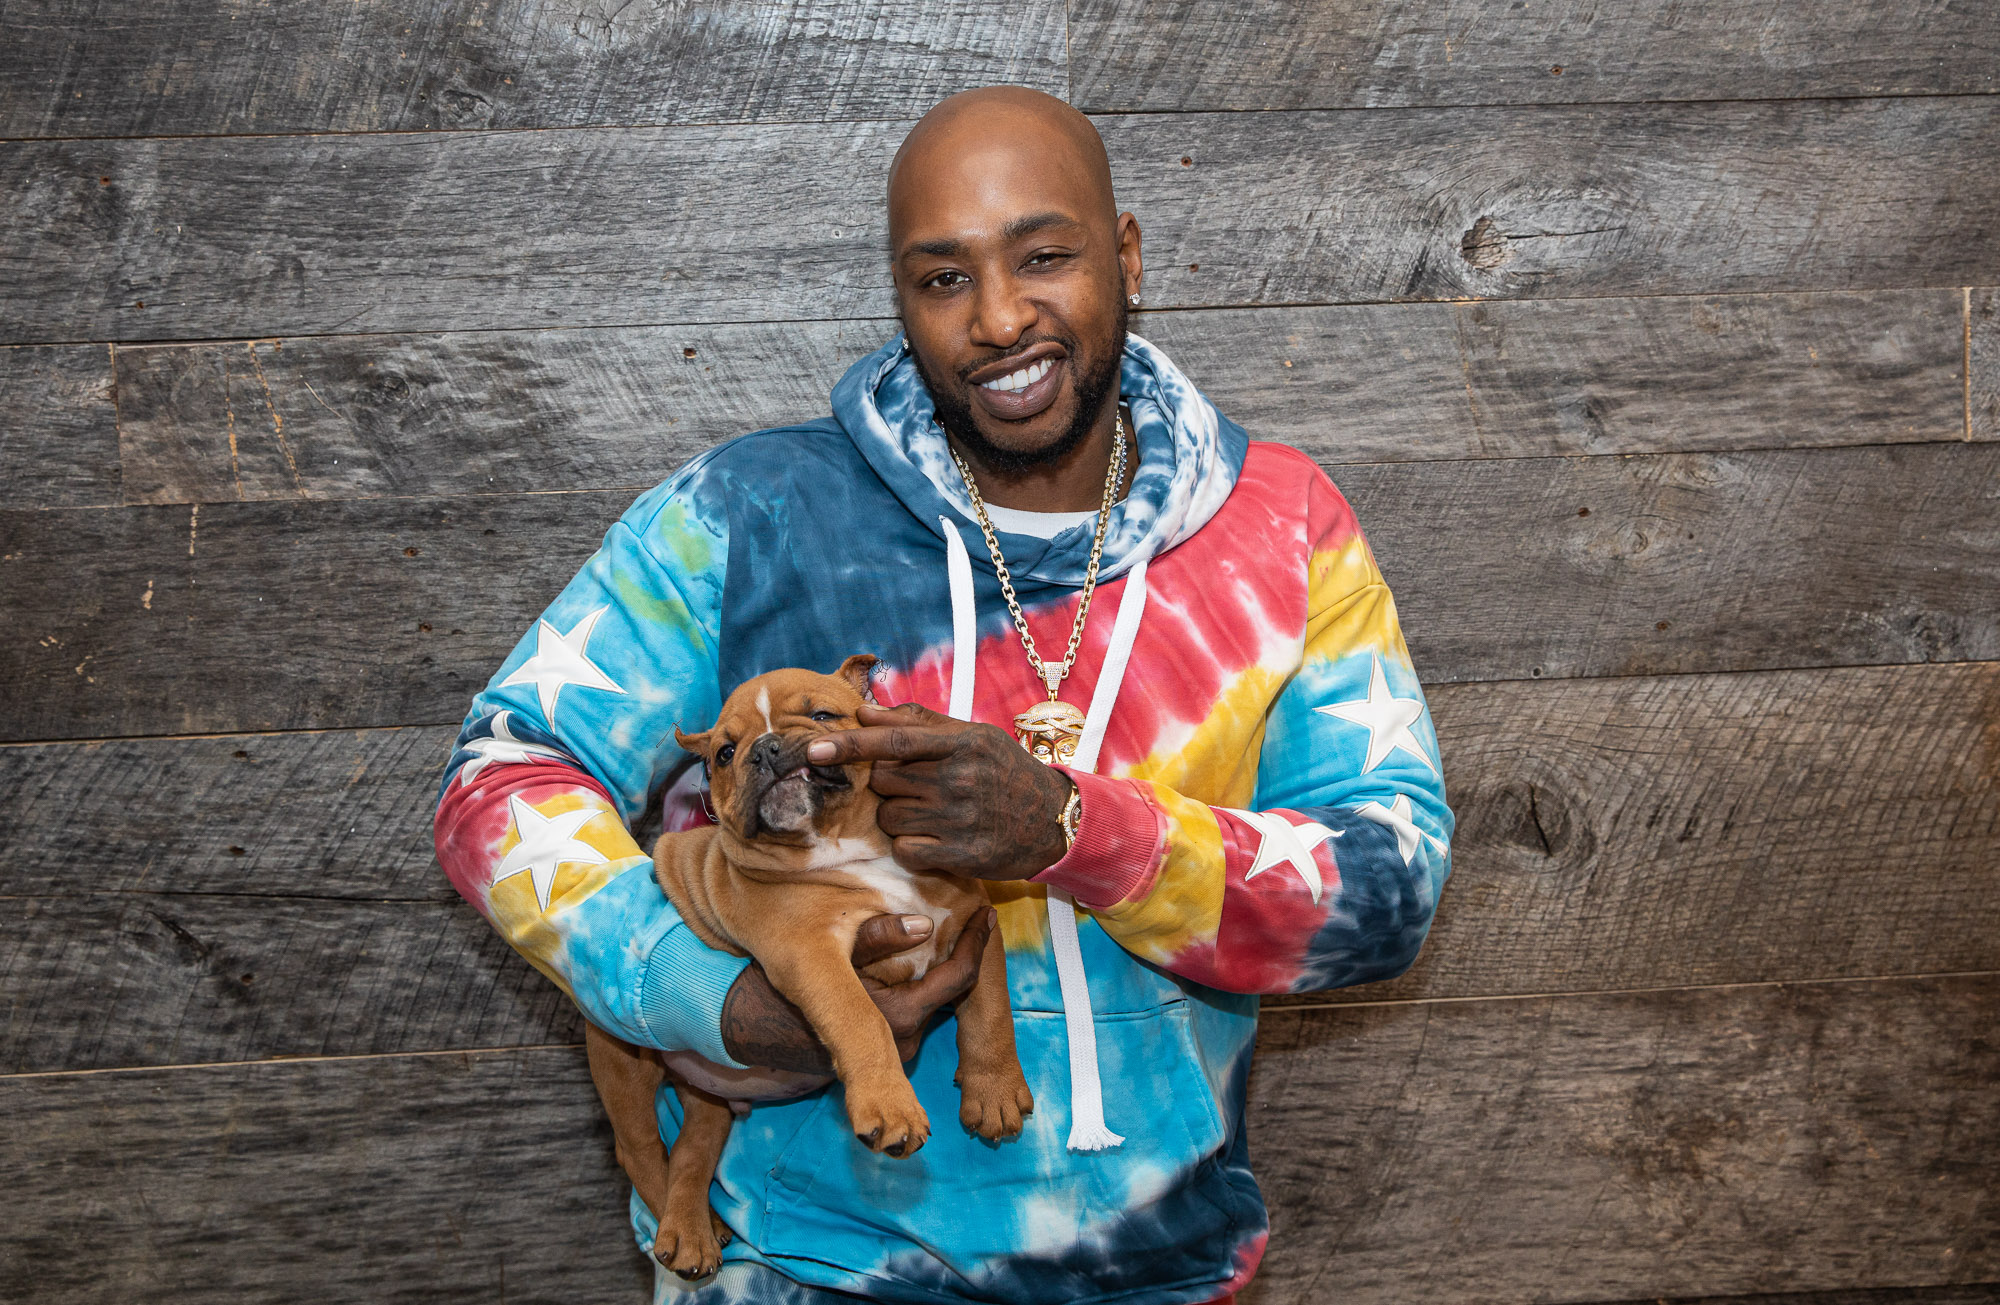 Ceaser Emanuel Fired From VH1's "Black Ink Crew" For Dog Abuse Video